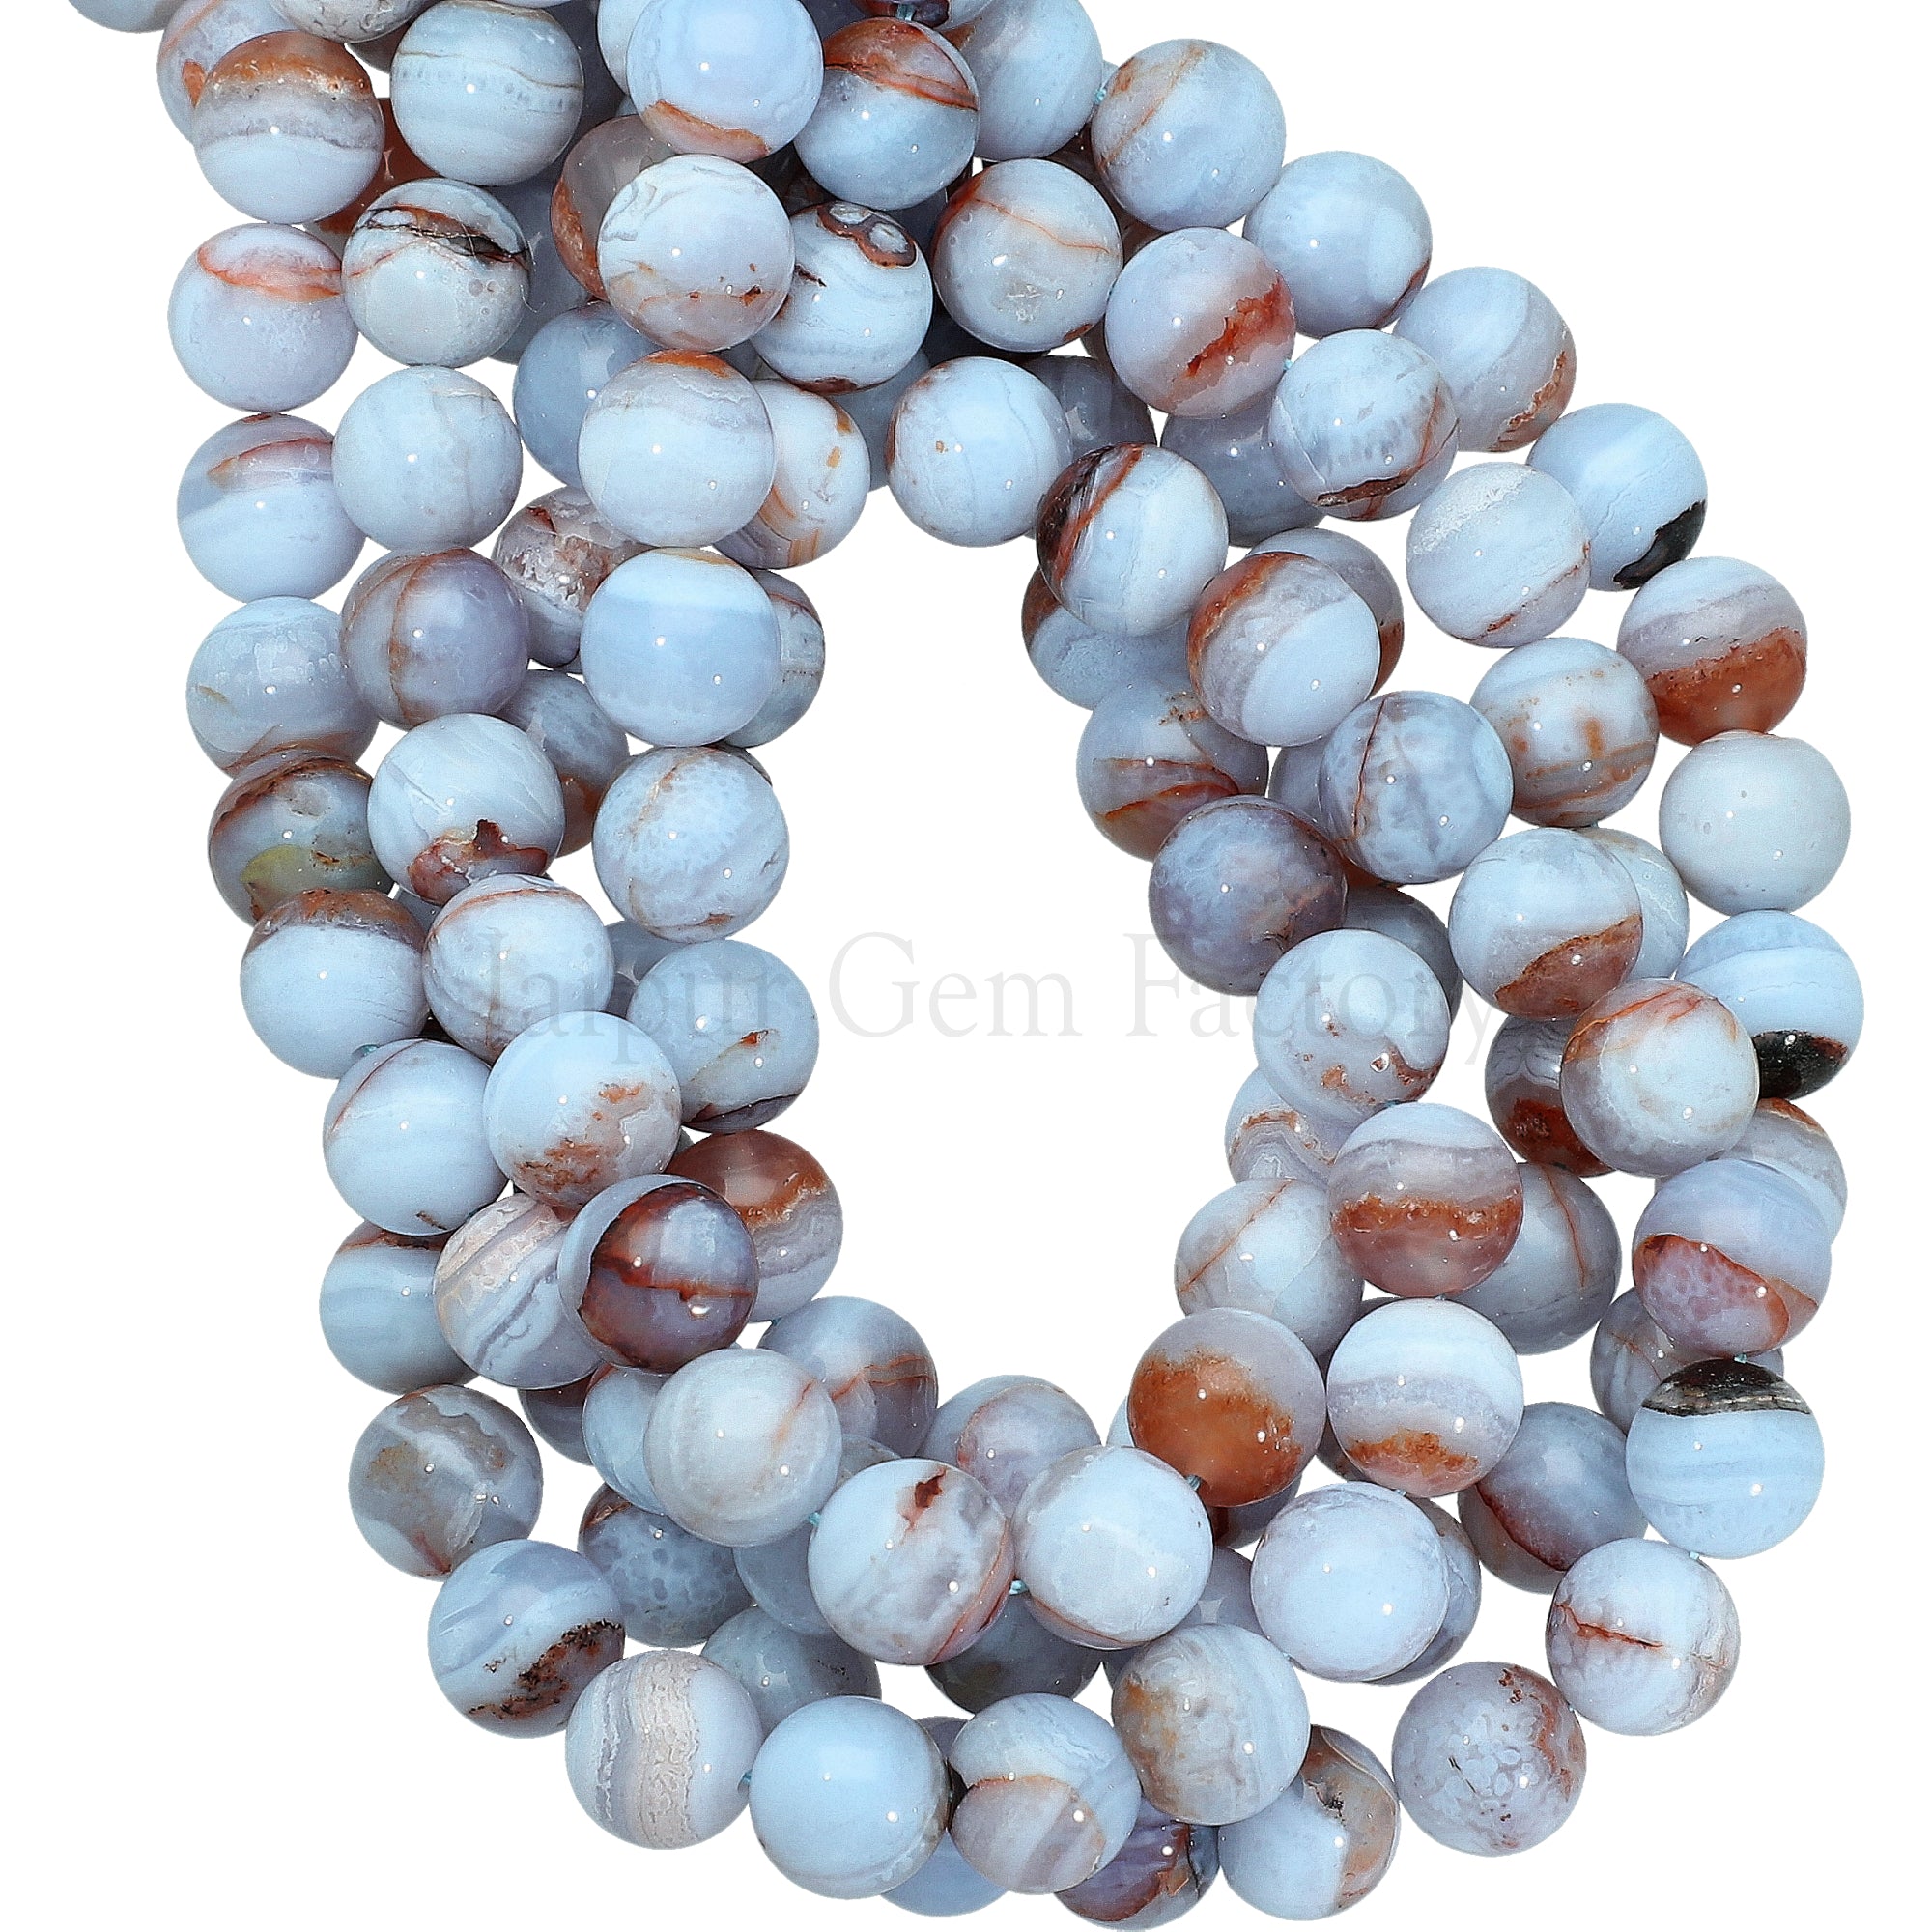 8 MM Blue Lace Agate Smooth Round Beads 14 Inches Strand